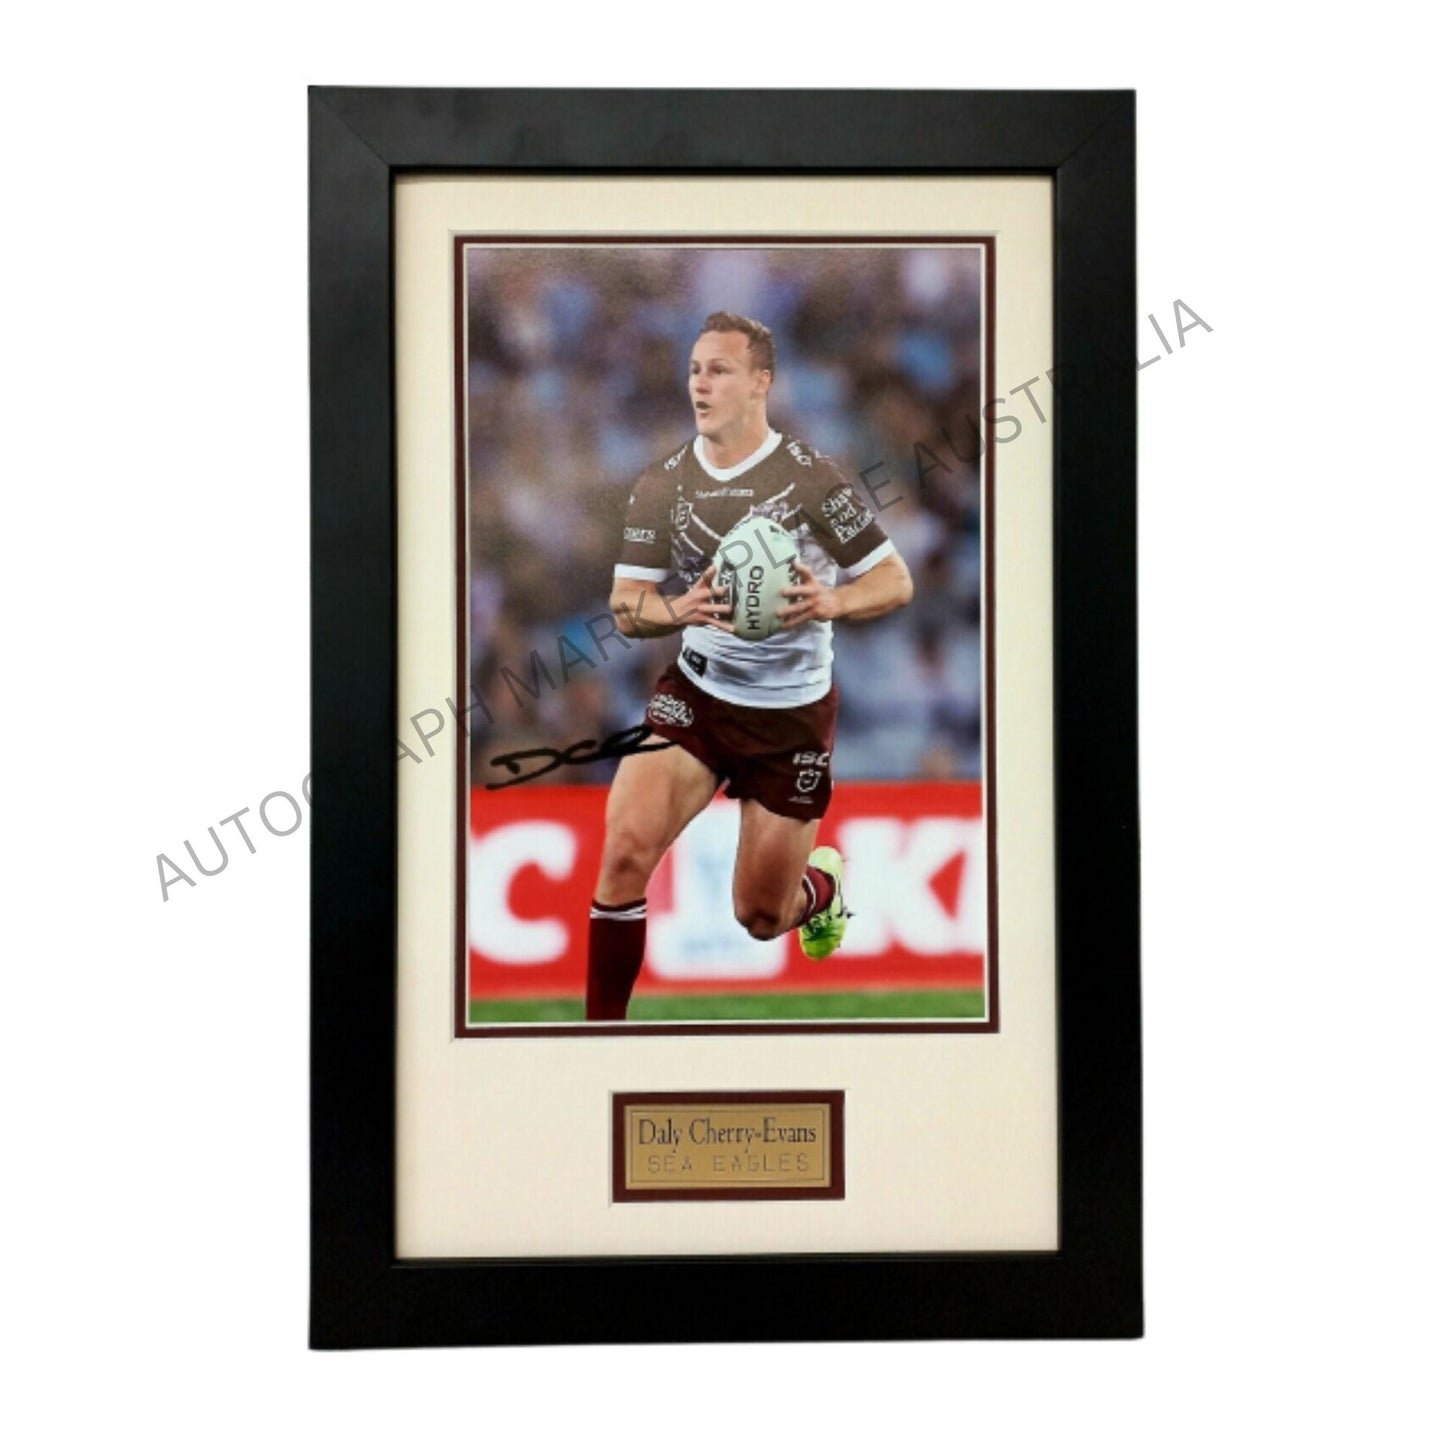 Daly Cherry-Evans DCE Manly Sea Eagles Photo Signed Framed Memorabilia